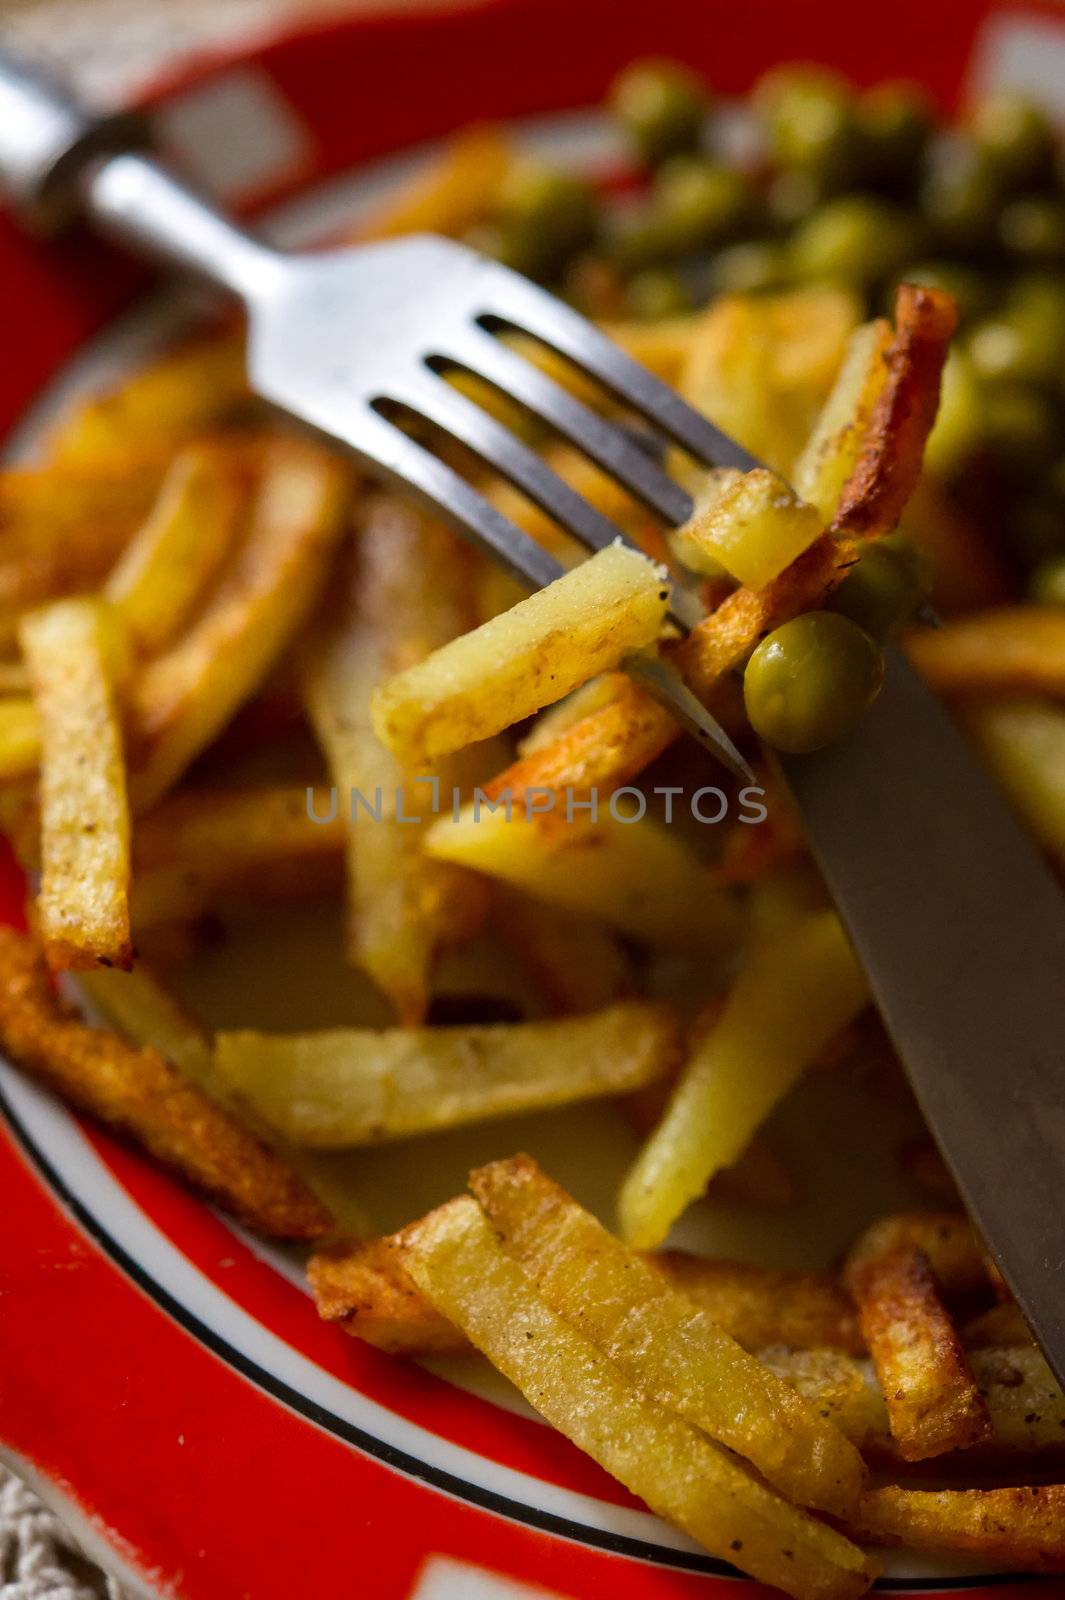 French fried potatoes with green peas on a plate served with fork and knife